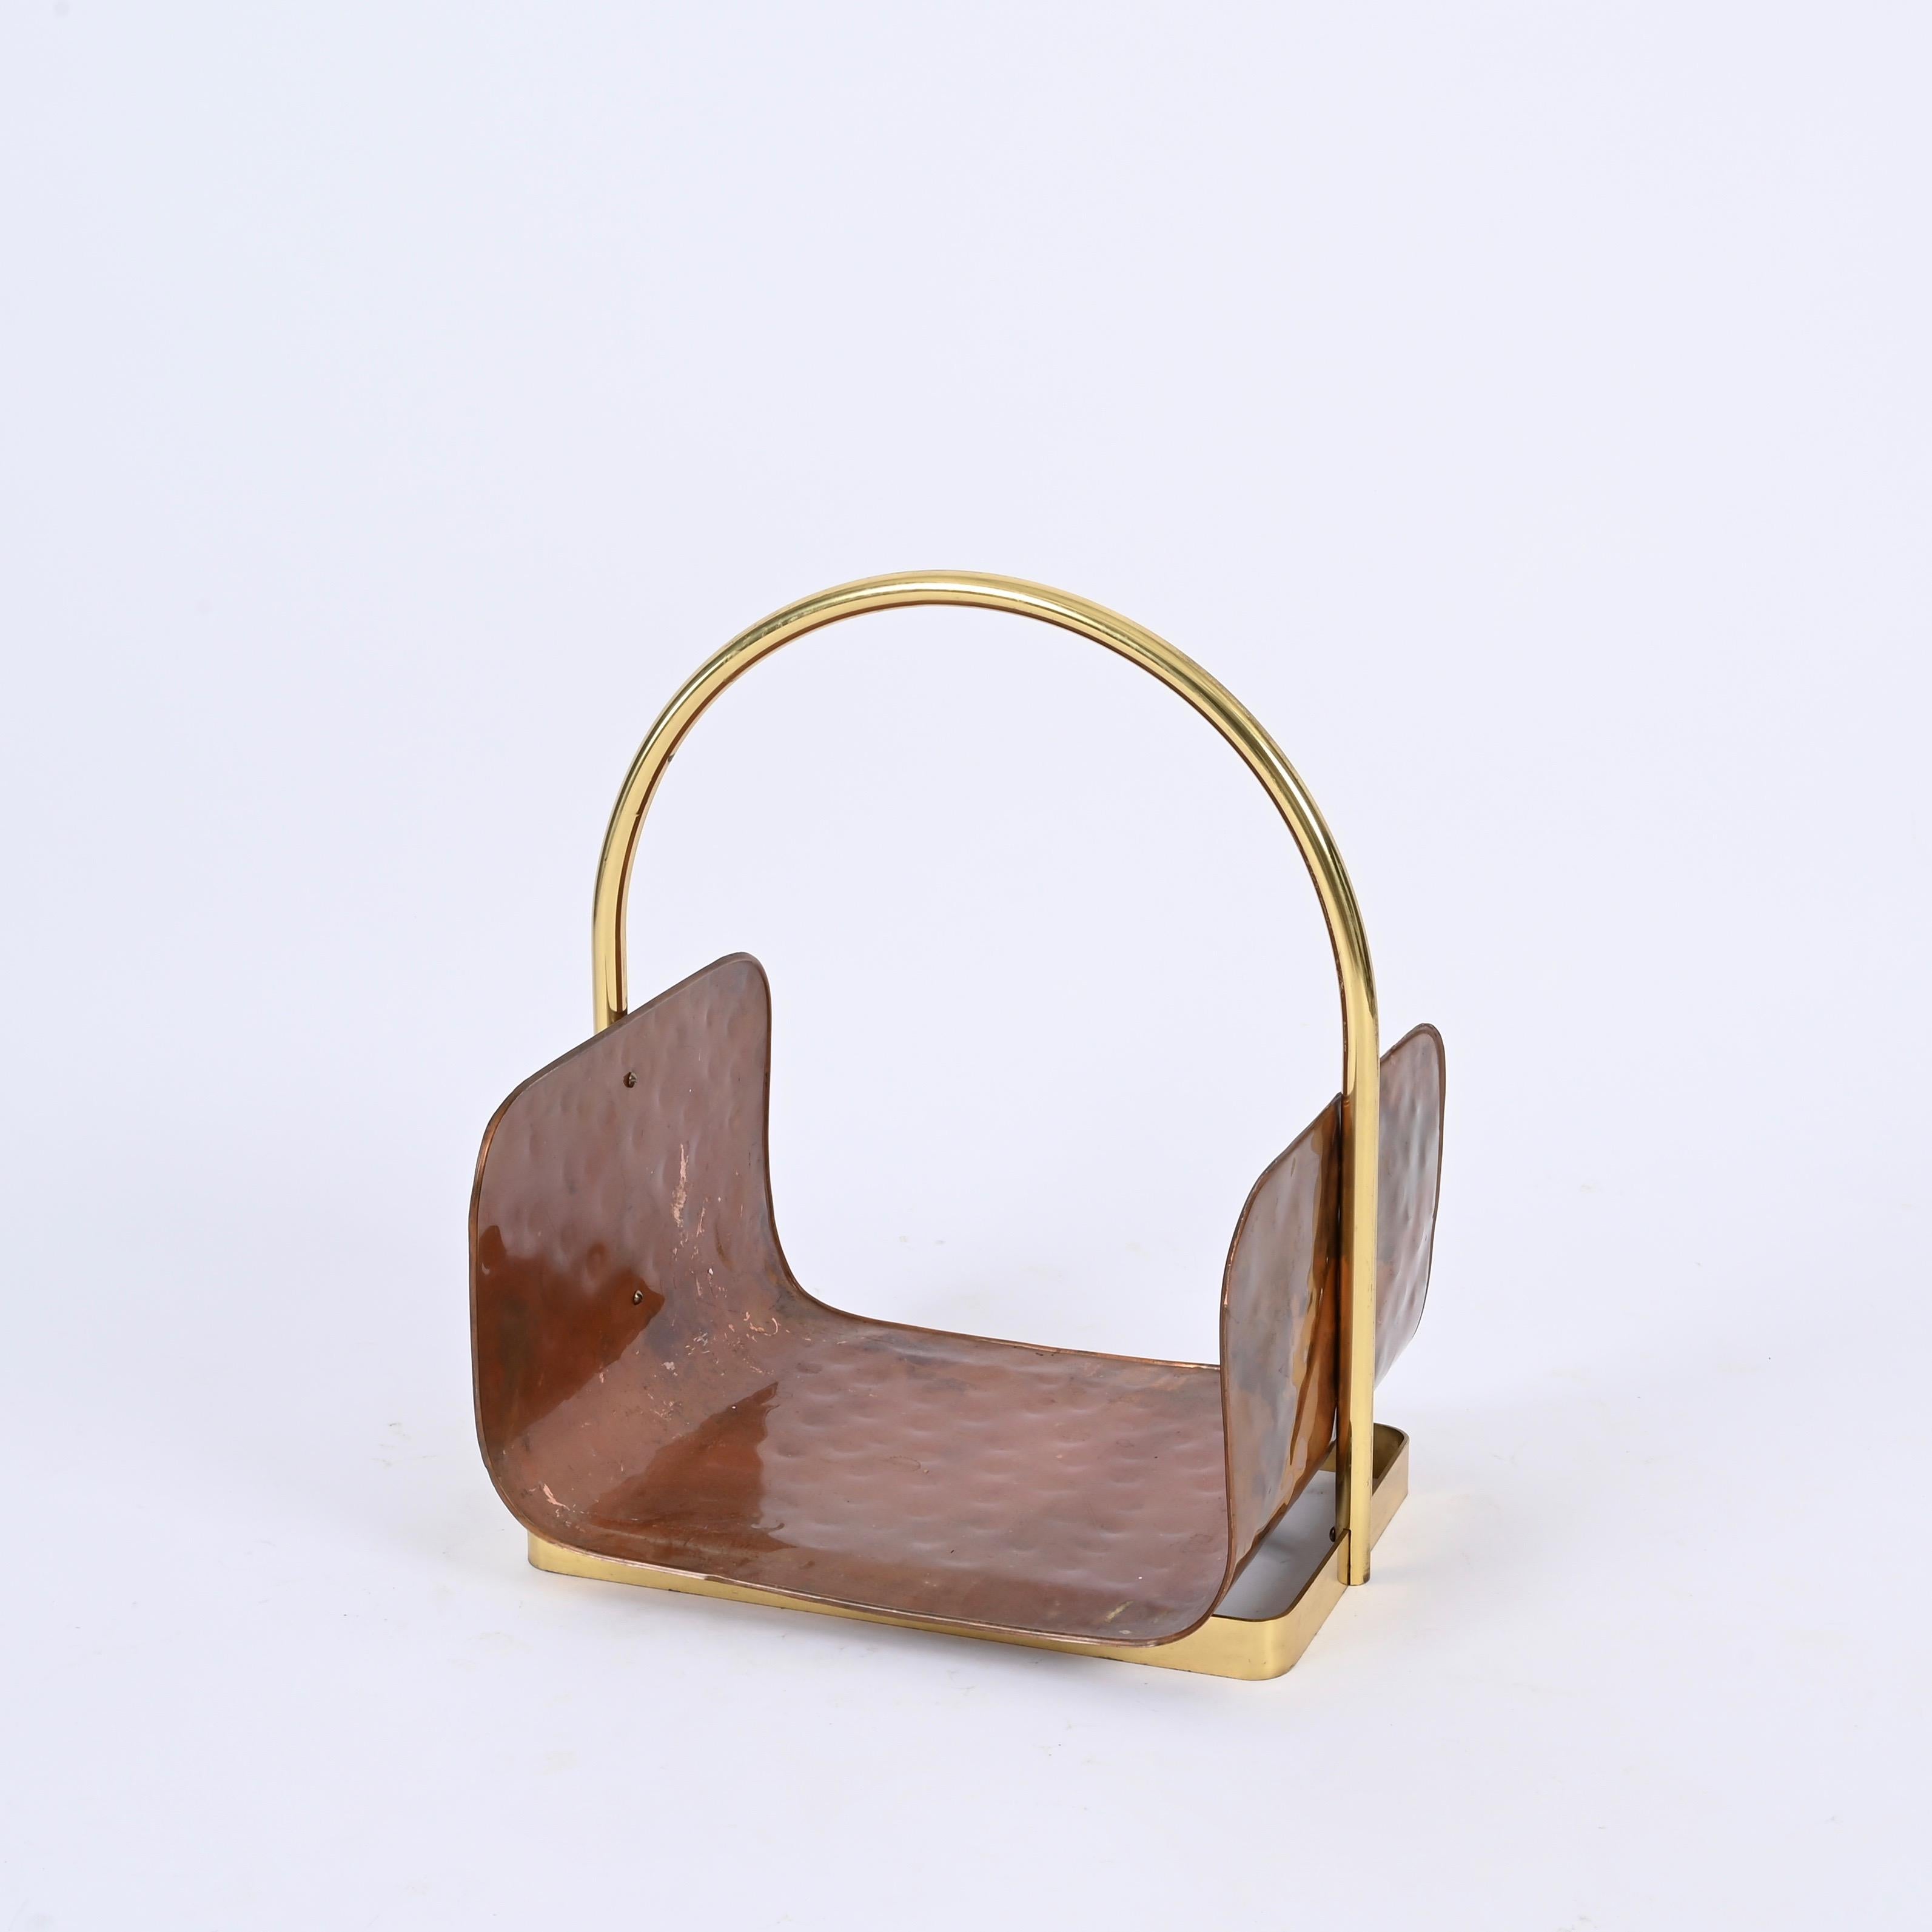 Midcentury Italian Magazine Rack in Hammered Copper and Brass, Italy 1970s For Sale 3